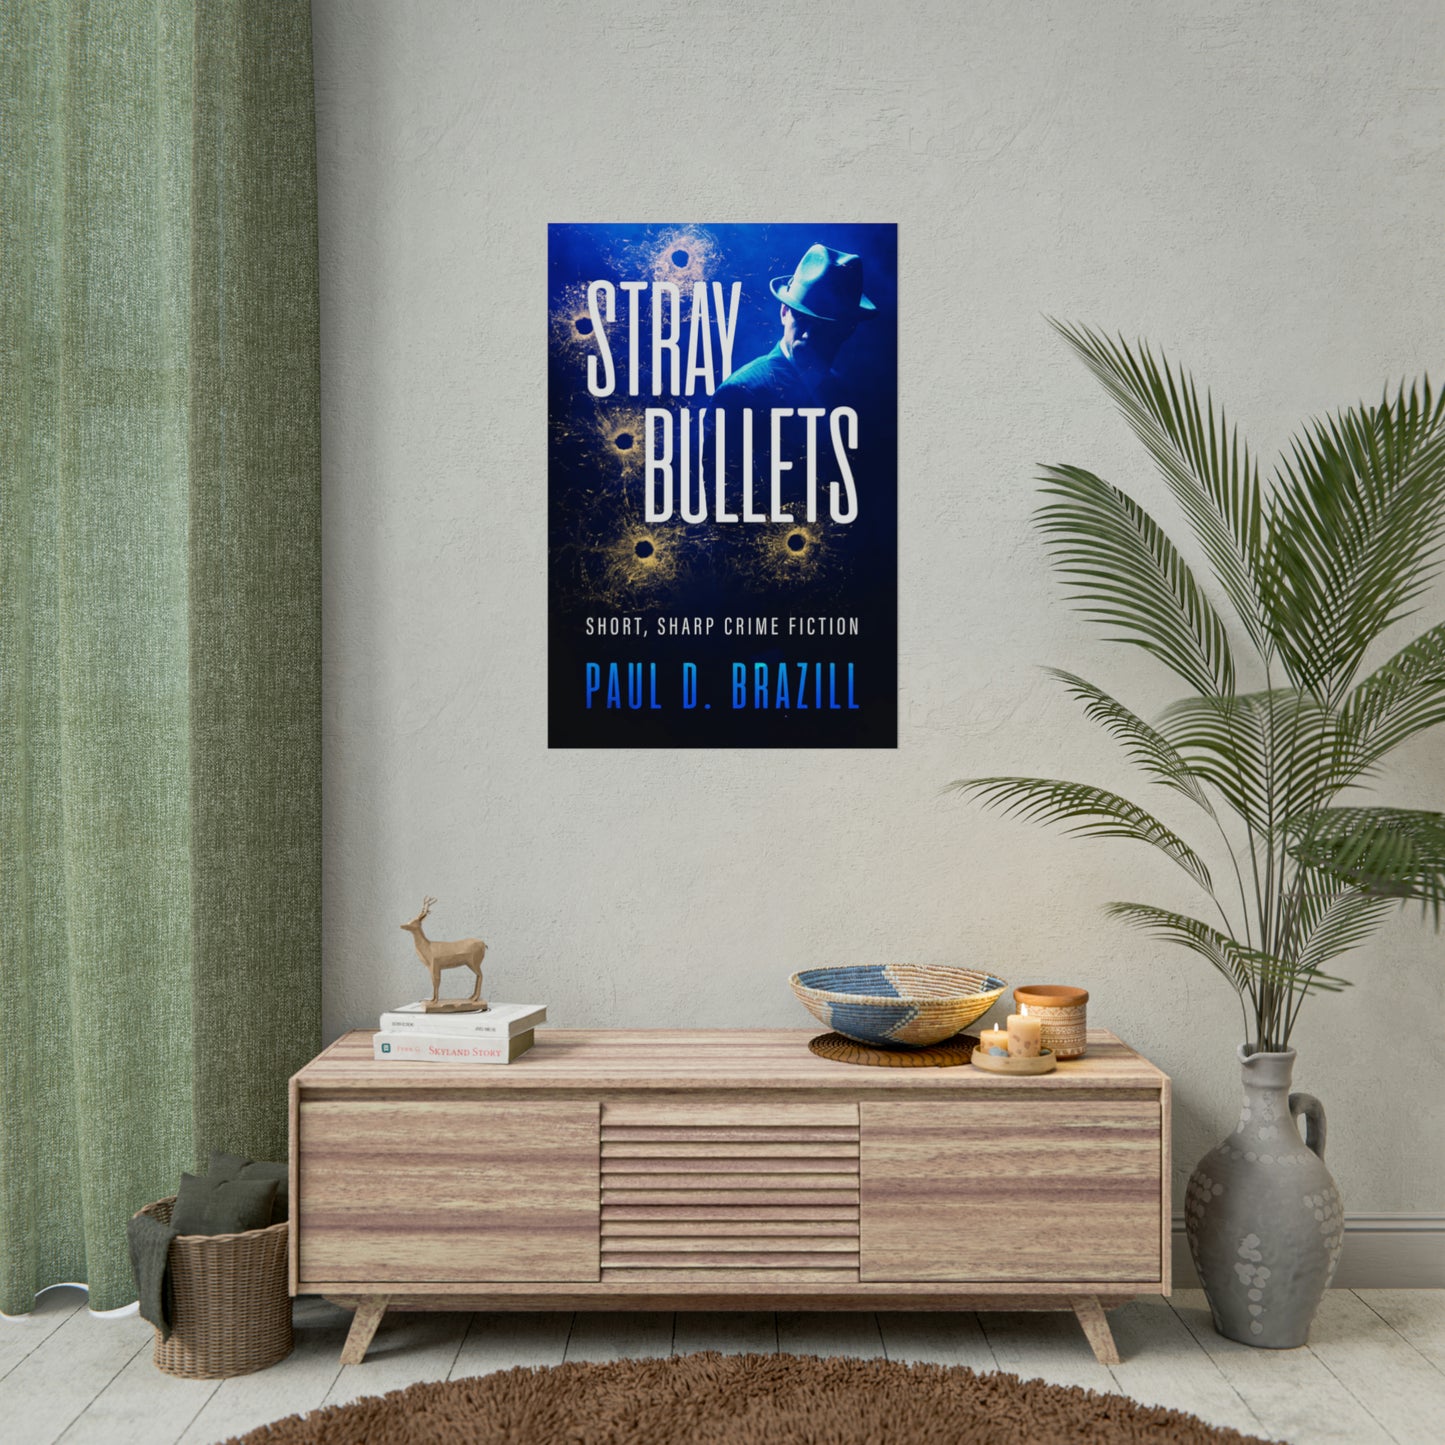 Stray Bullets - Rolled Poster